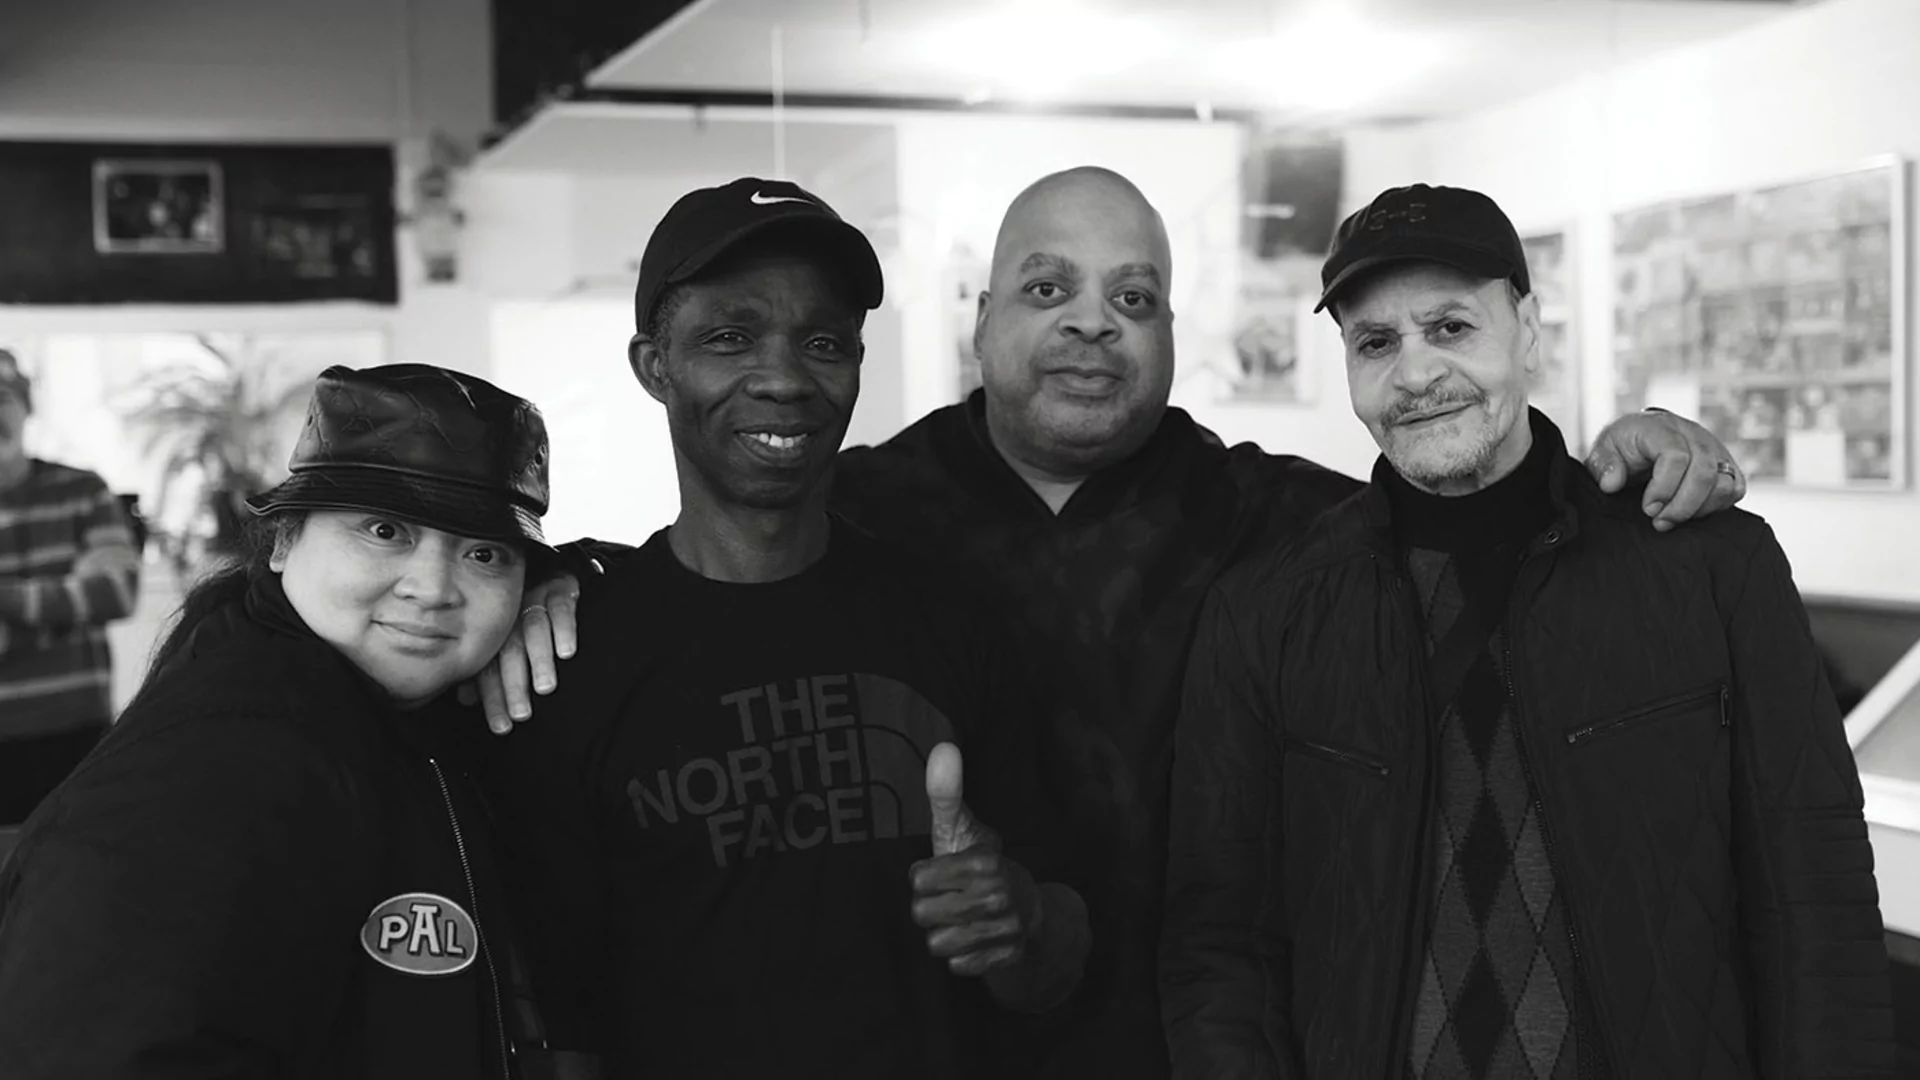 Black and white photo of Ahne, DJ Bone and two others Regenboog, Amsterdam for Homeless Homies